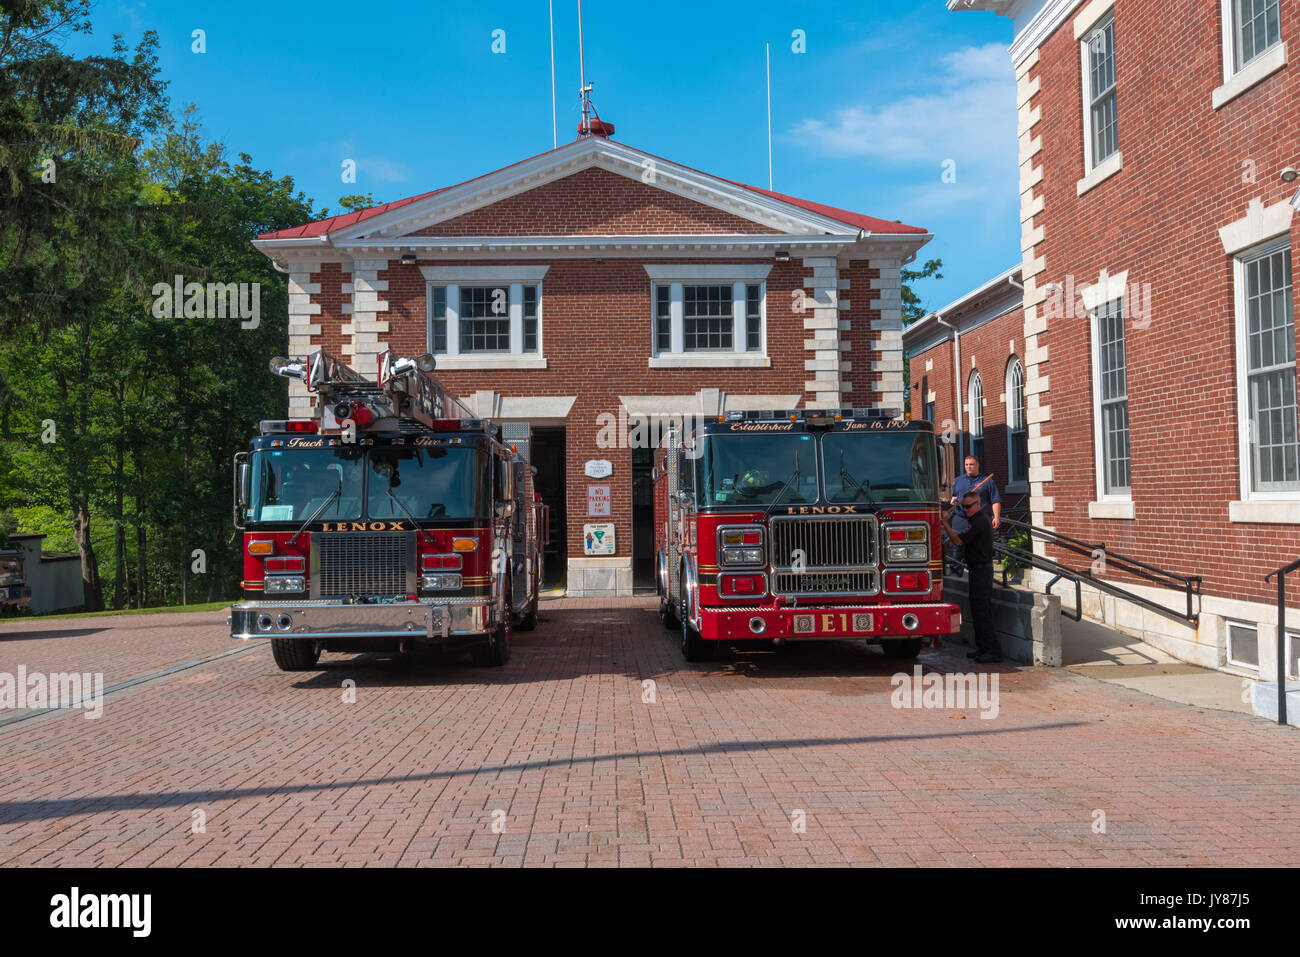 Lenox MA, USA 8/17/2017 -- Two fire engines are parked ouside the firehouse in Lenox MA. Editorial Use Only Stock Photo